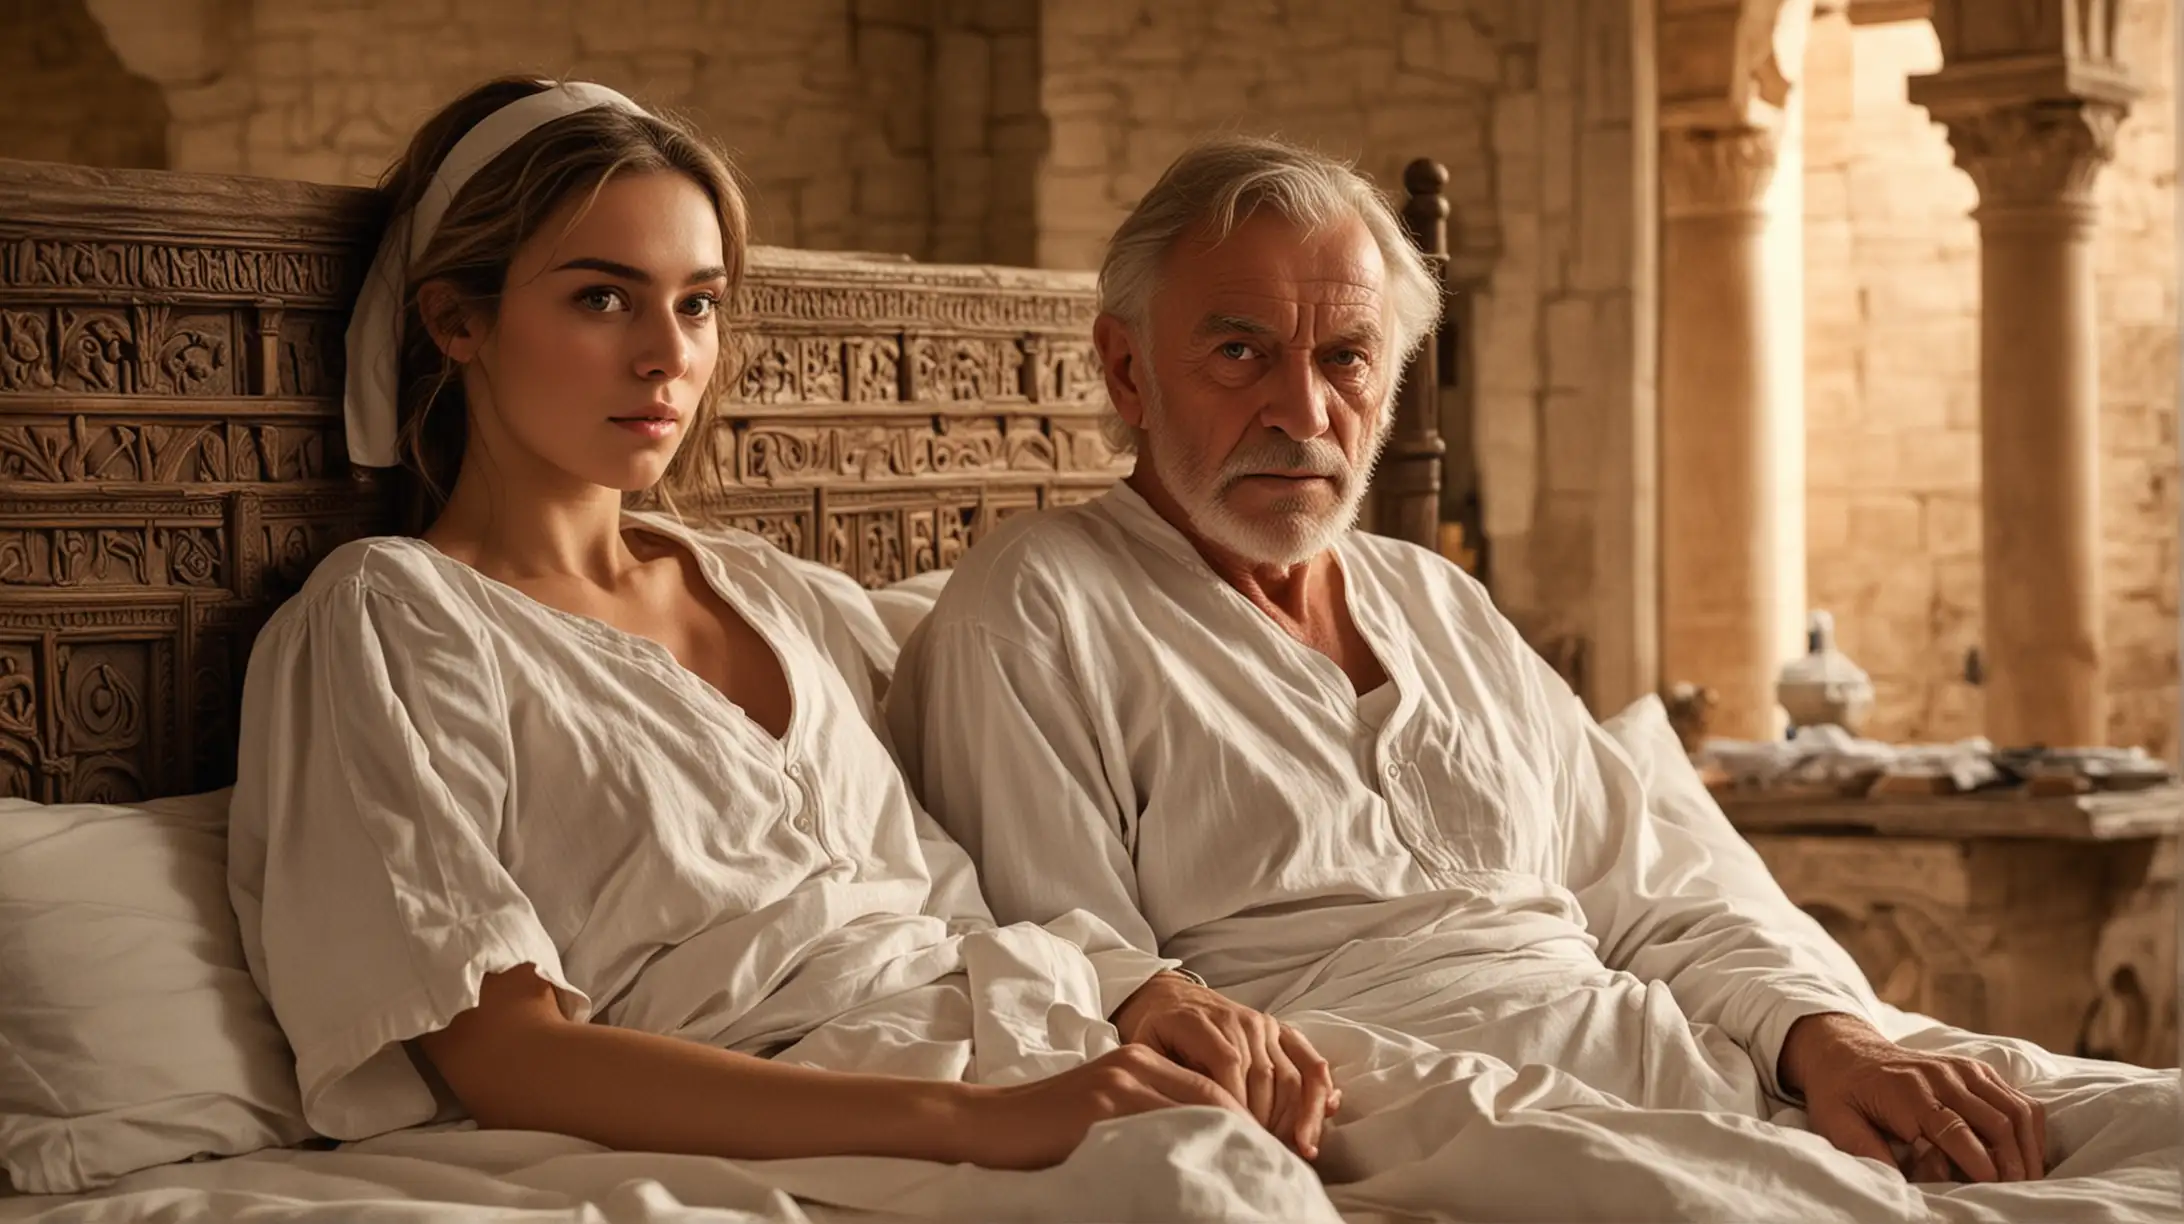 An old handsome man is lying in bed. And a Young attractive nurse is looking after him. Set in a Desert Palace, During the Biblical era of King David.